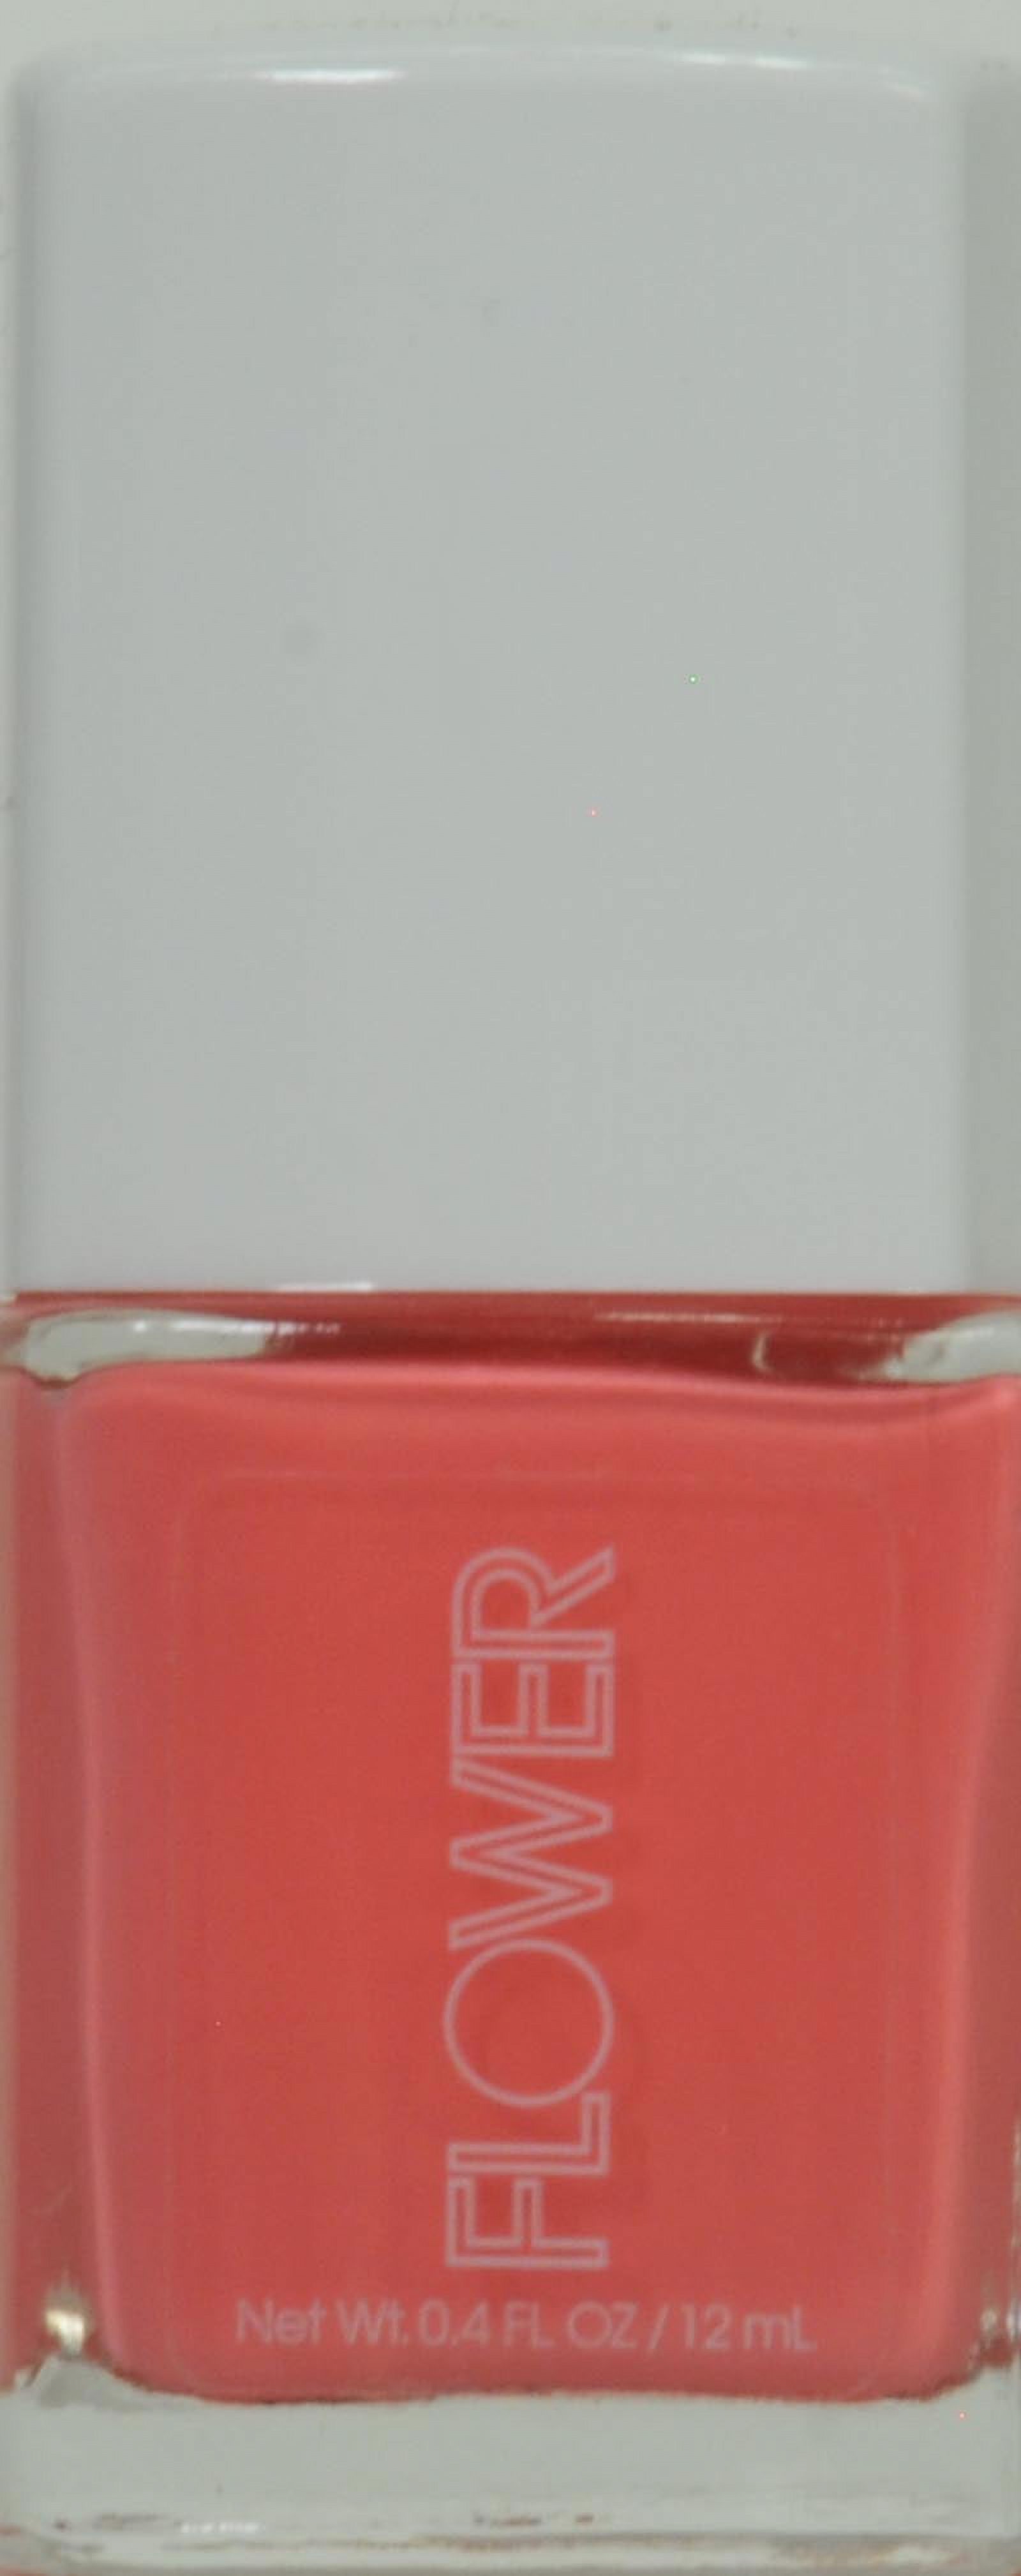 Flower Nail'd It Nail Lacquer, 0.4 fl oz - image 2 of 4